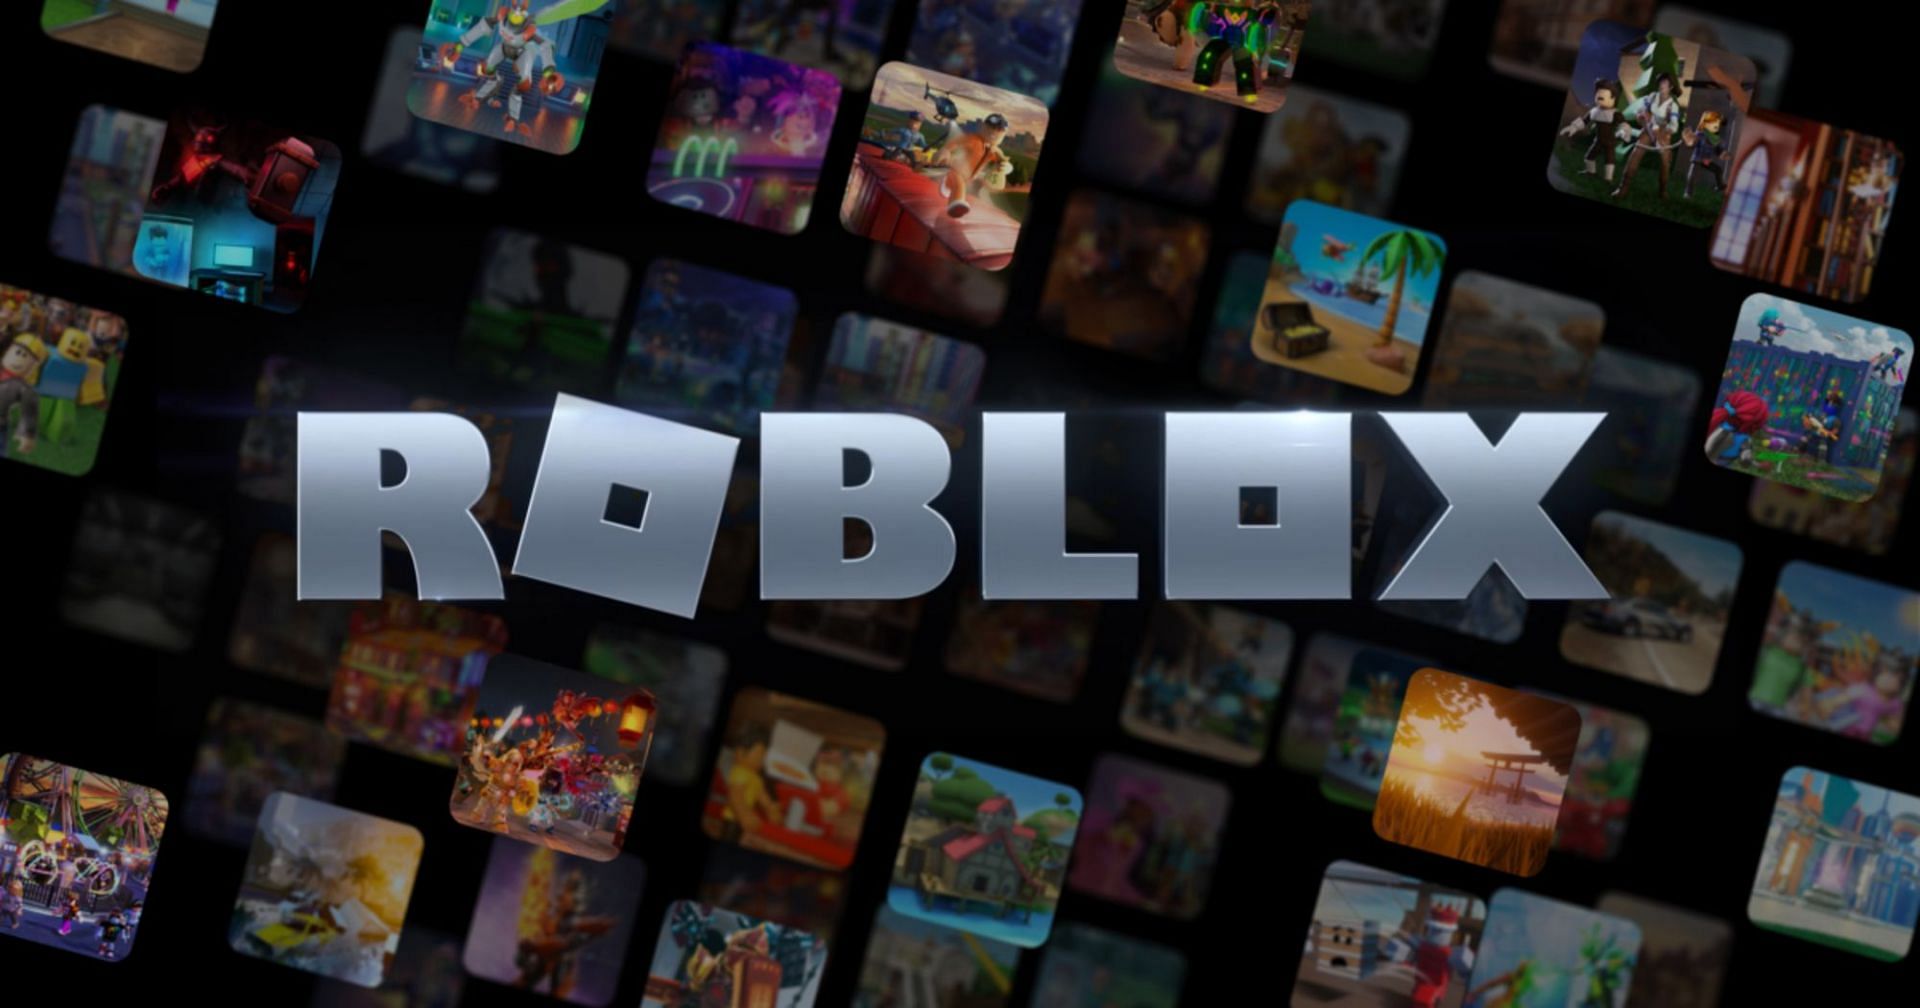 Roblox Outage Sparks Usage Rise in Rival Mobile Games Minecraft and Among Us